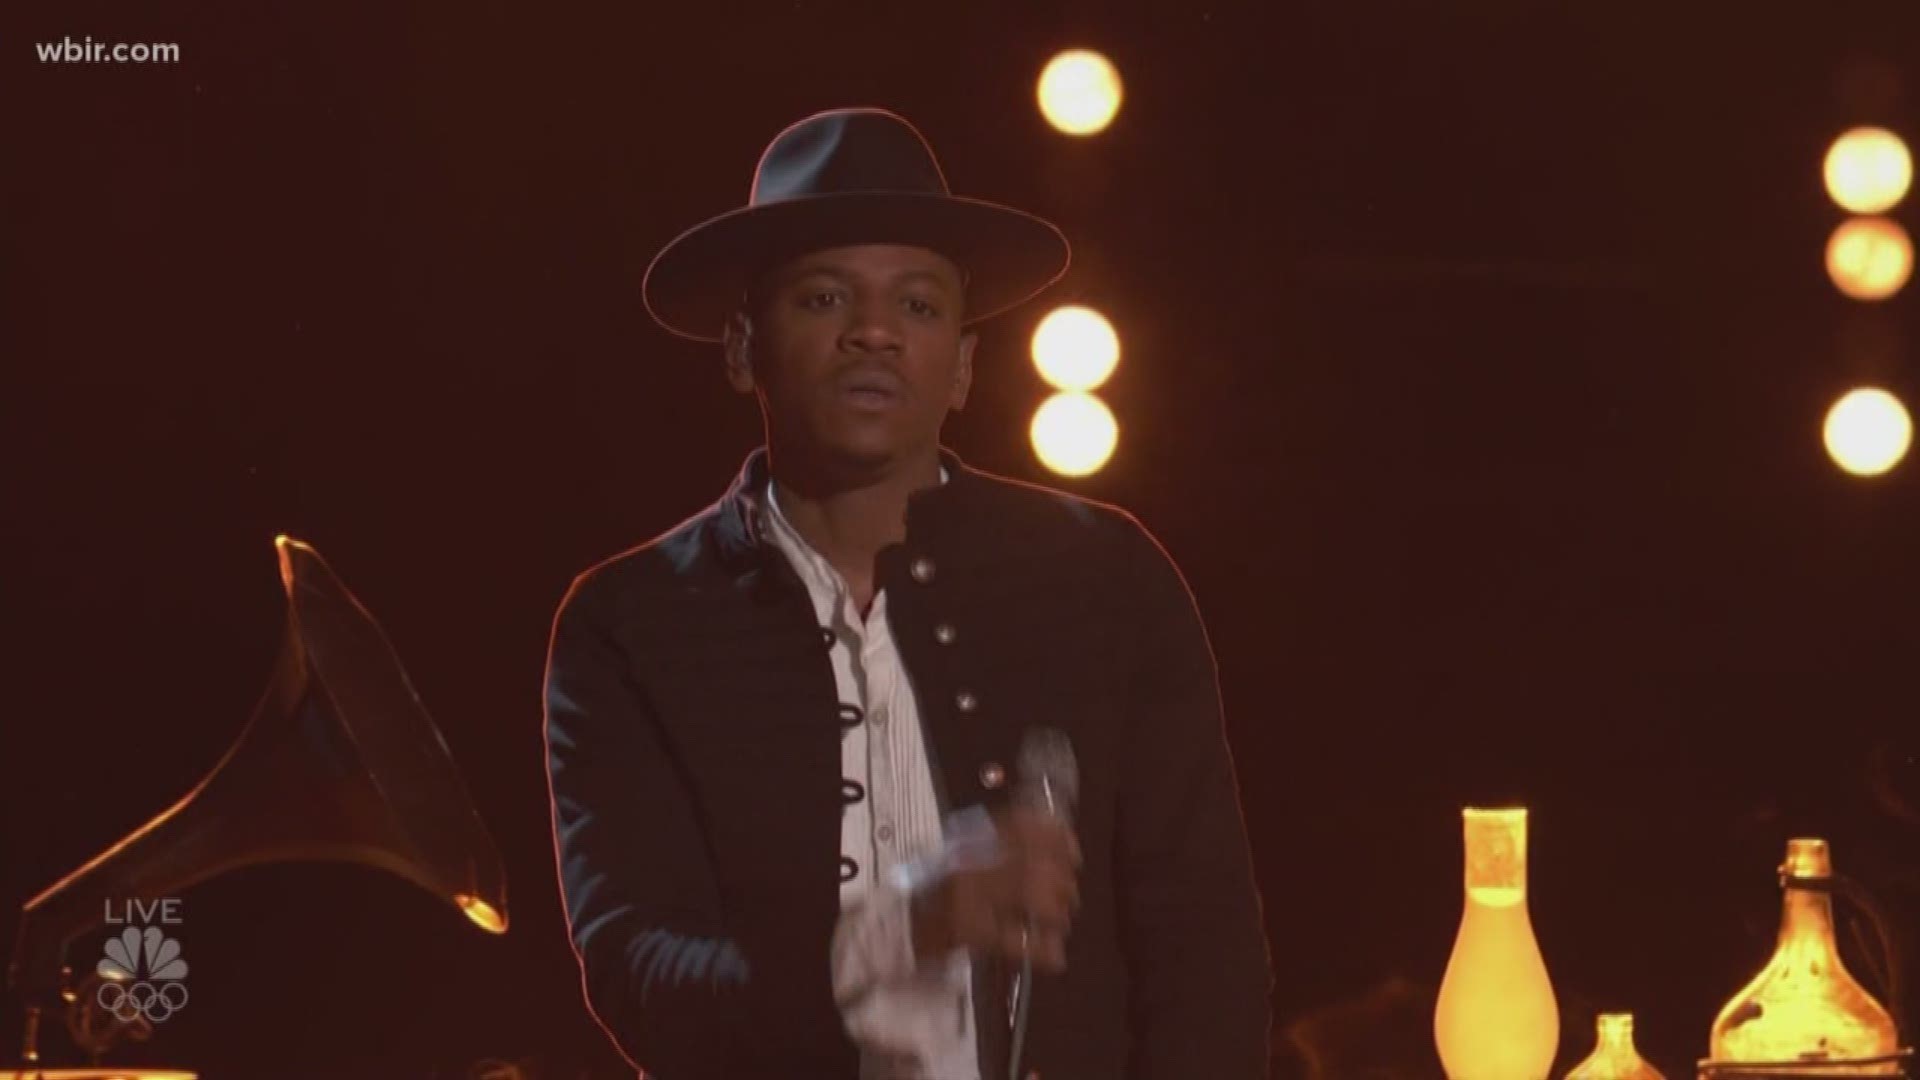 Dec. 19, 2017: Knoxville's Chris Blue returned to The Voice stage with a performance during the season 13 finale.